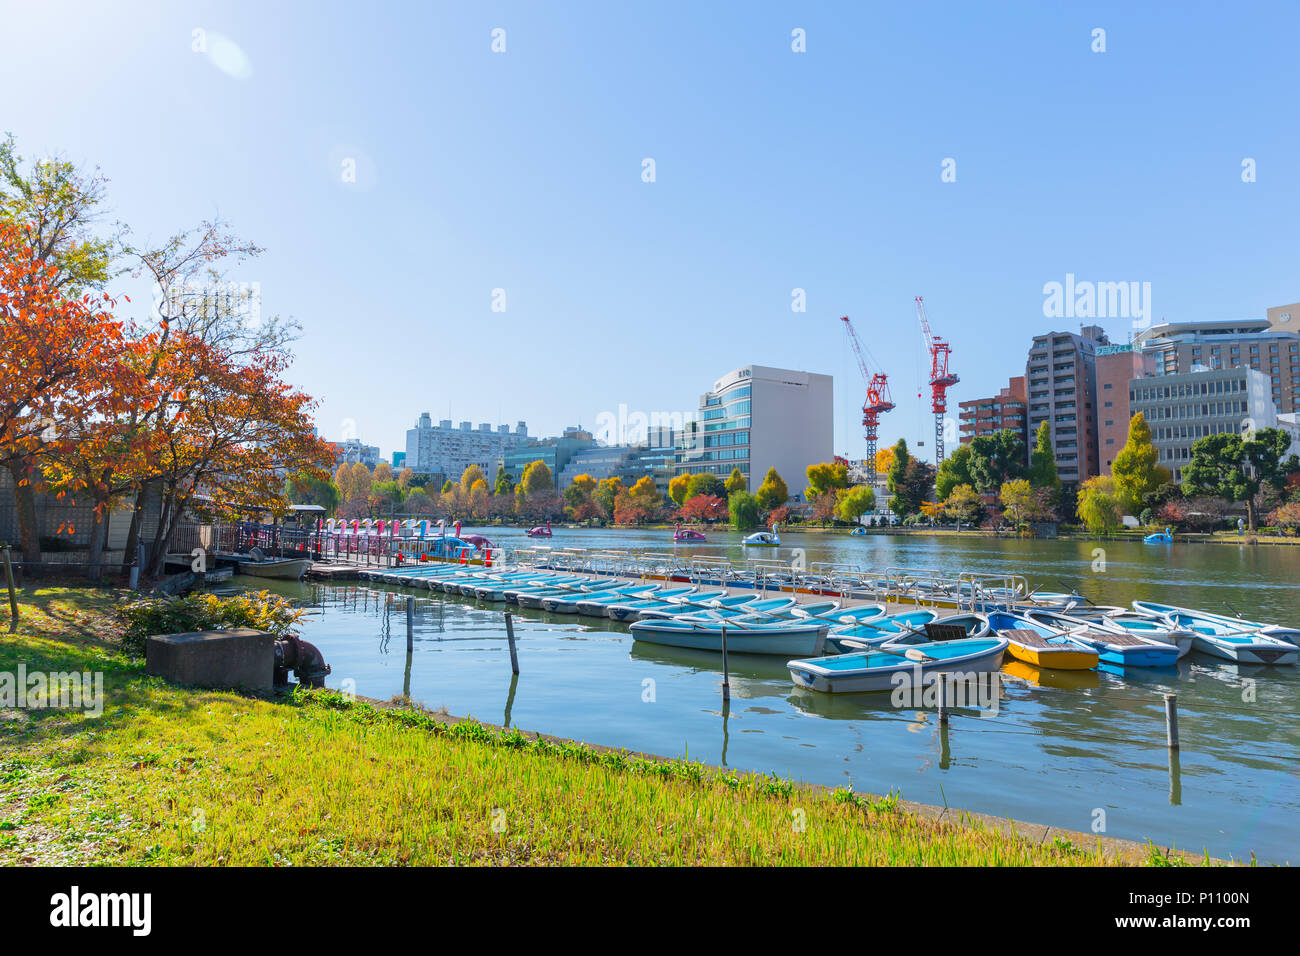 Ueno Park is most popular public relax green space lake with pedal boats in central of Tokyo established in 1873 with 8,800 trees and sakura that bloo Stock Photo